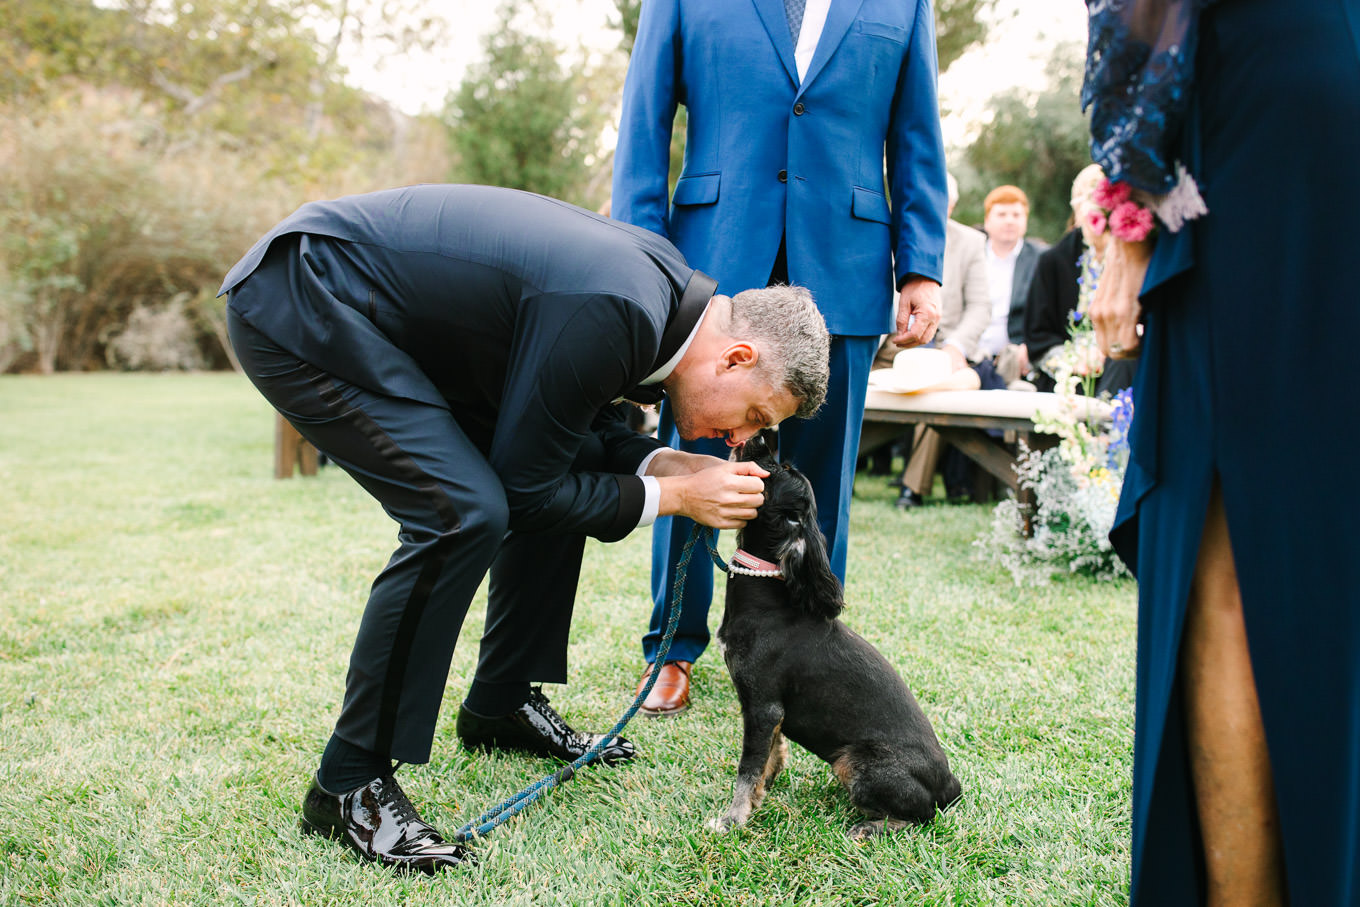 Groom with his dog at wedding ceremony | Colorful and quirky wedding at Higuera Ranch in San Luis Obispo | #sanluisobispowedding #californiawedding #higueraranch #madonnainn   
Source: Mary Costa Photography | Los Angeles